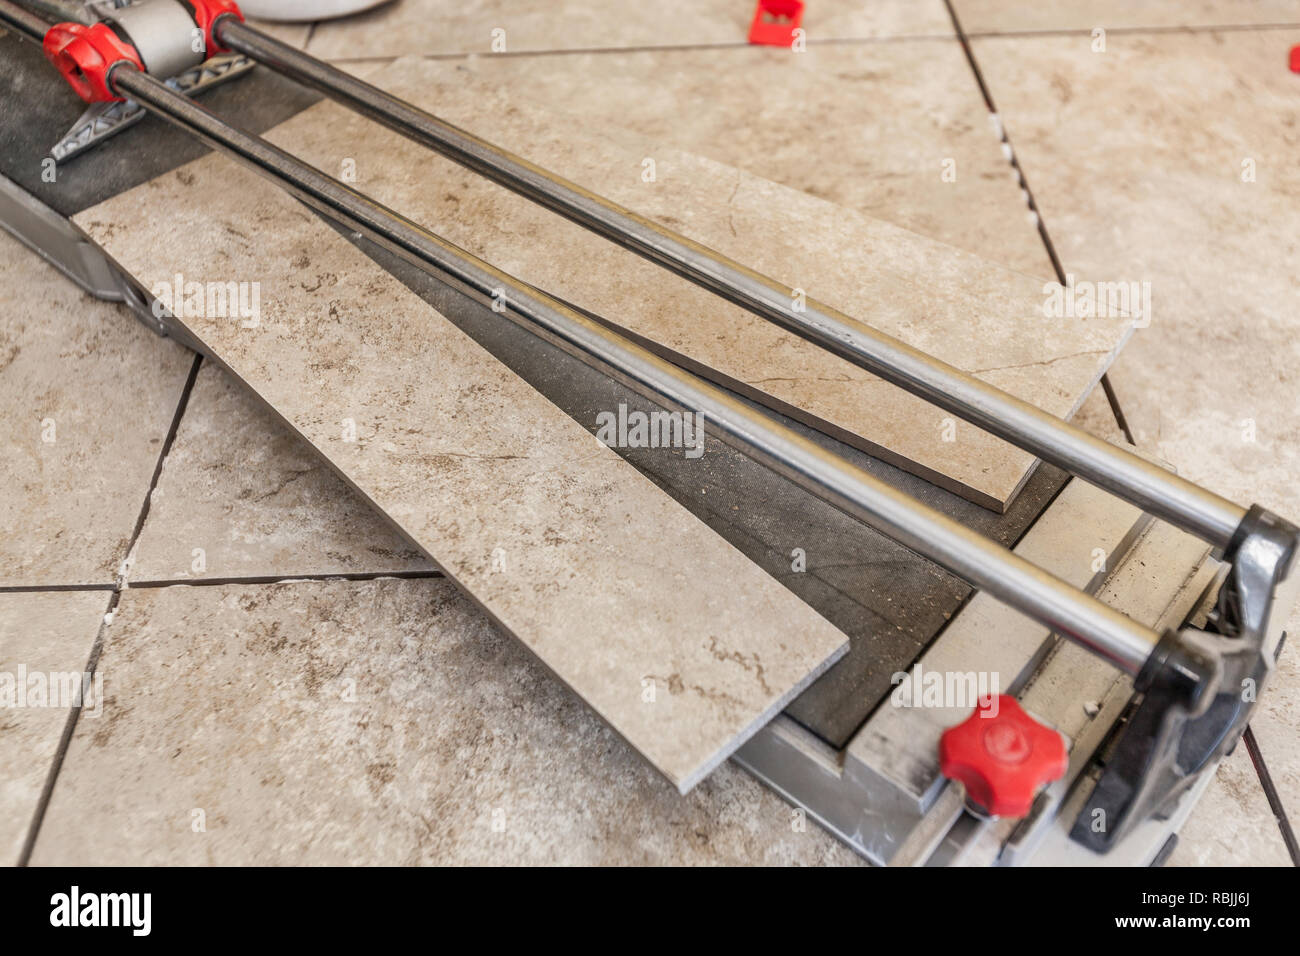 Using A Tile Cutter On Floor Stock Photo